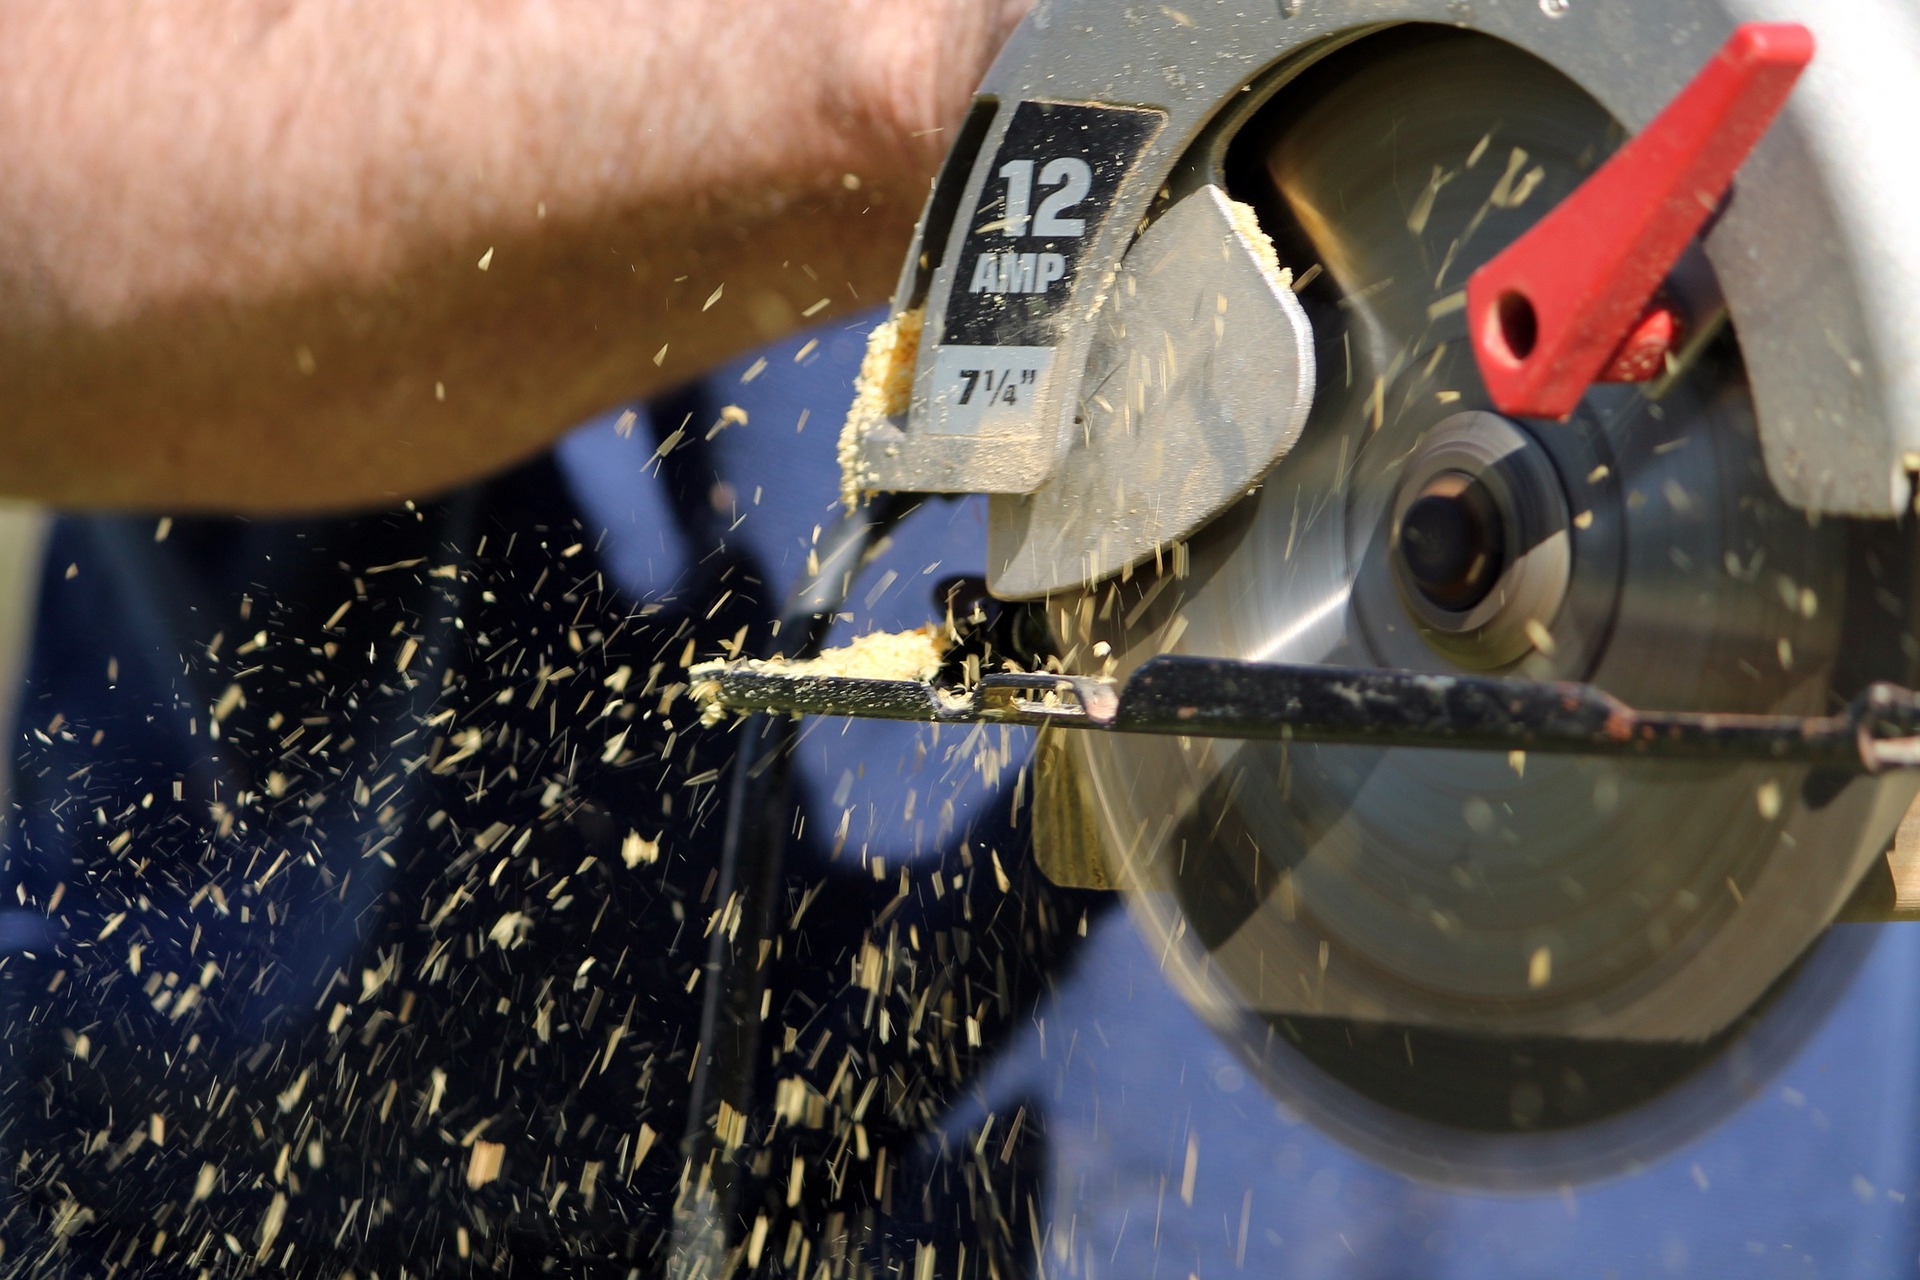 A-Comprehensive-Guide-to-Circular-Saws-Types-and-Applications